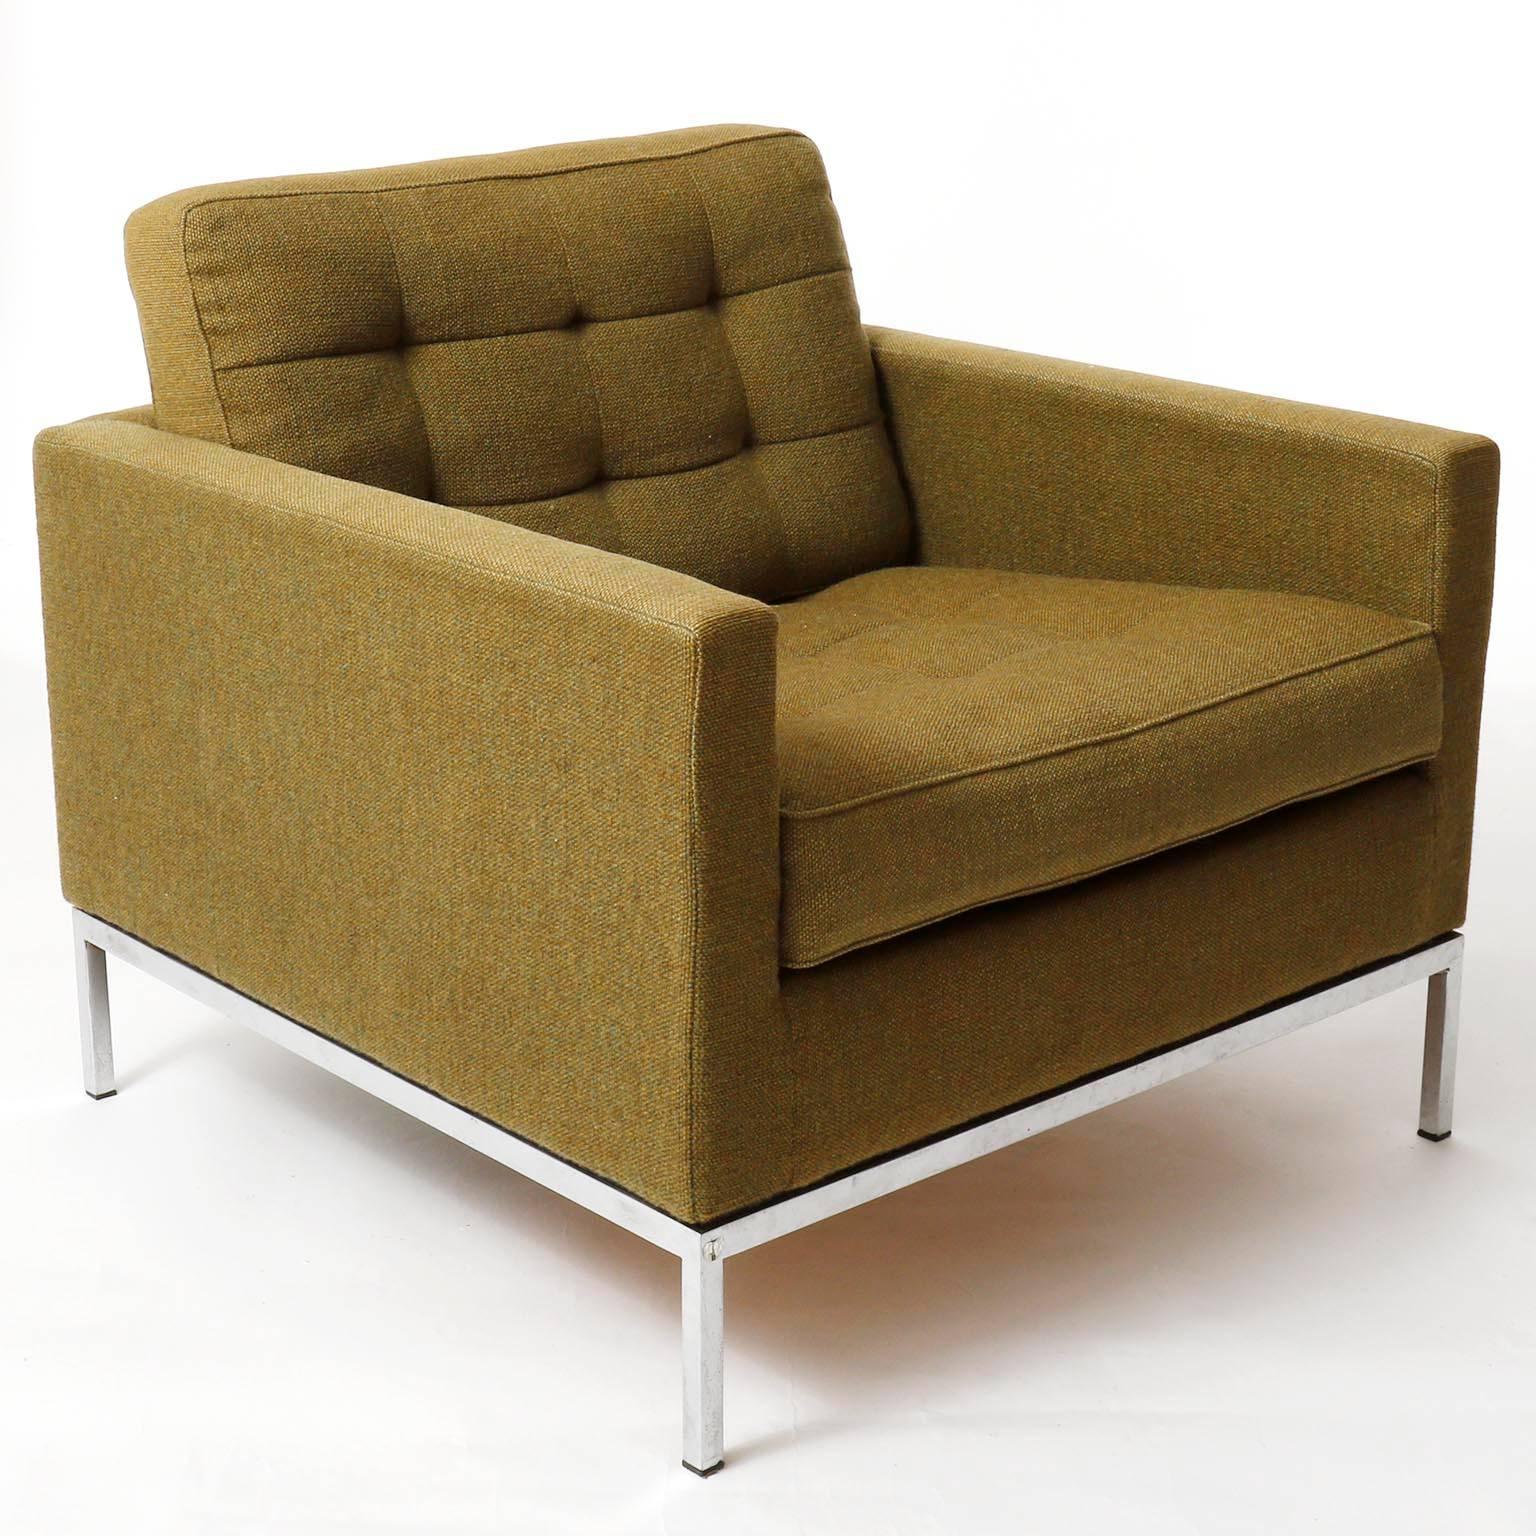 A set of great lounge armchairs model 1205 S1 designed by Florence Knoll in 1954 and manufactured by Knoll International in Mid-Century. 
The exposed metal frame and the legs are made of heavy gauge steel with a polished chrome finish. The inner